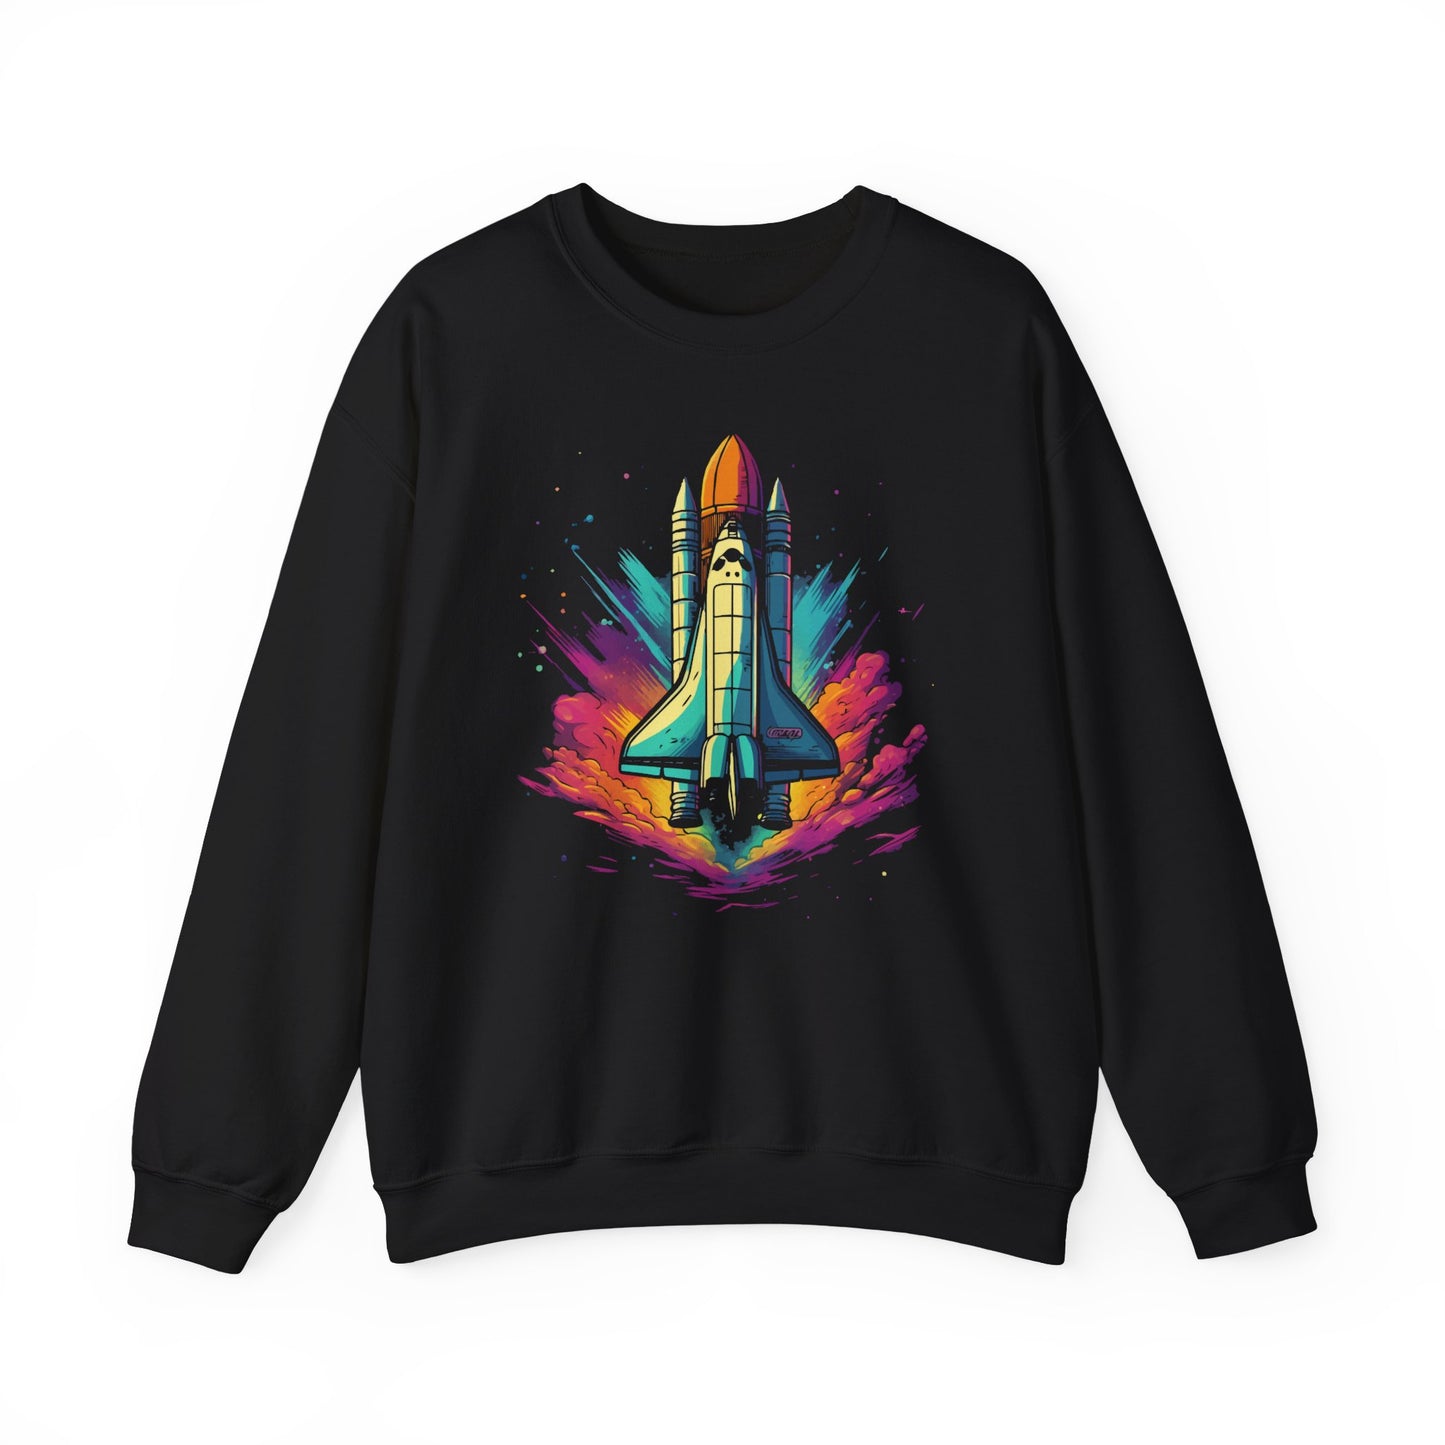 Space Shuttle Sweatshirt, Abstract Space Design